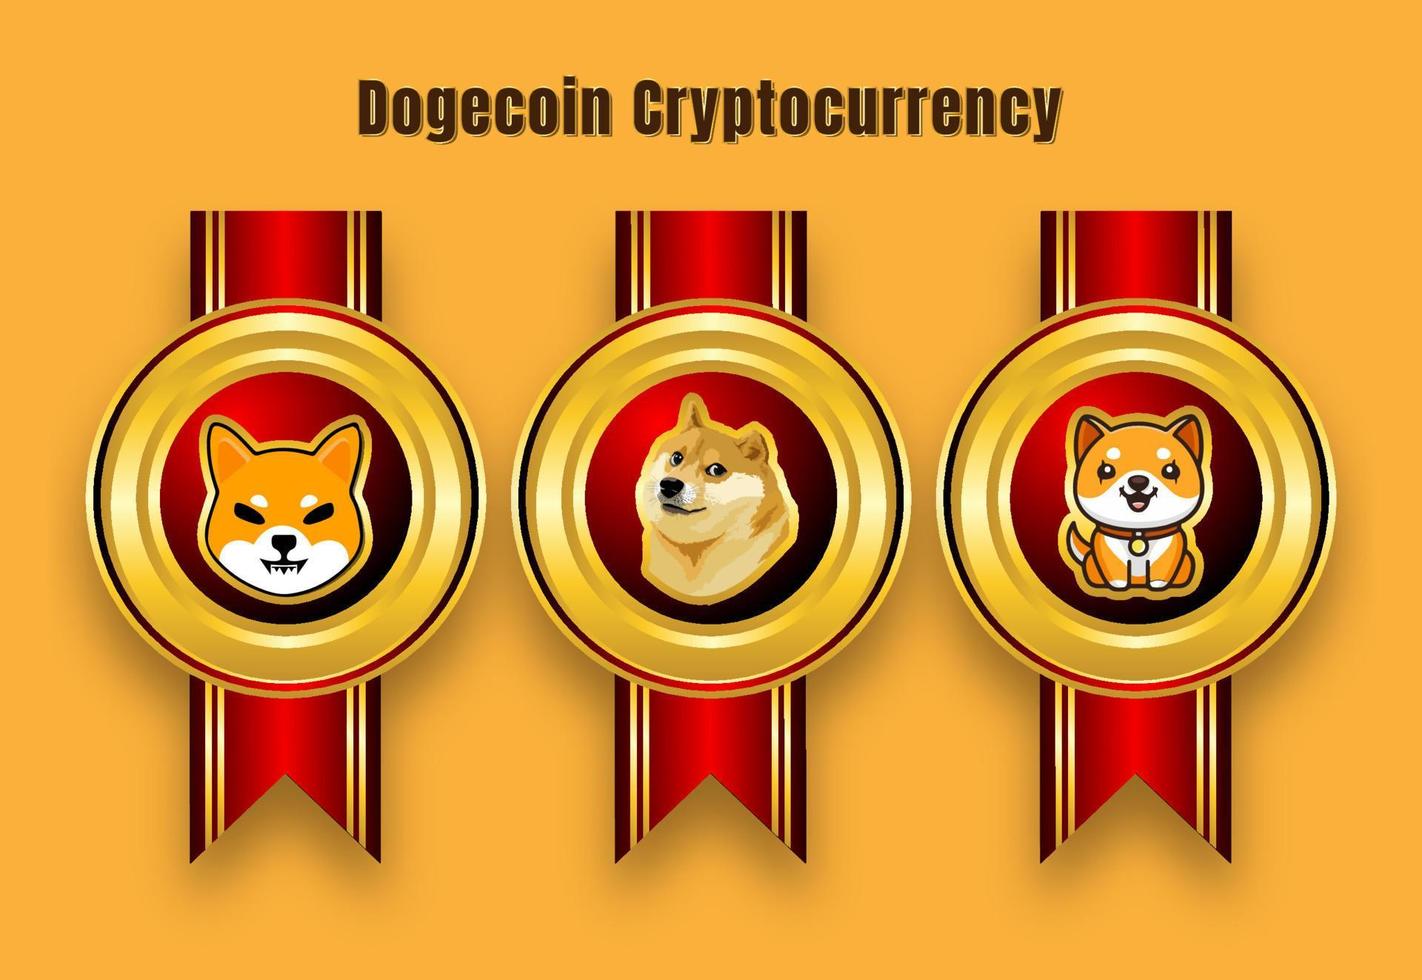 Doge coin meme cryptocurrency brand label vector